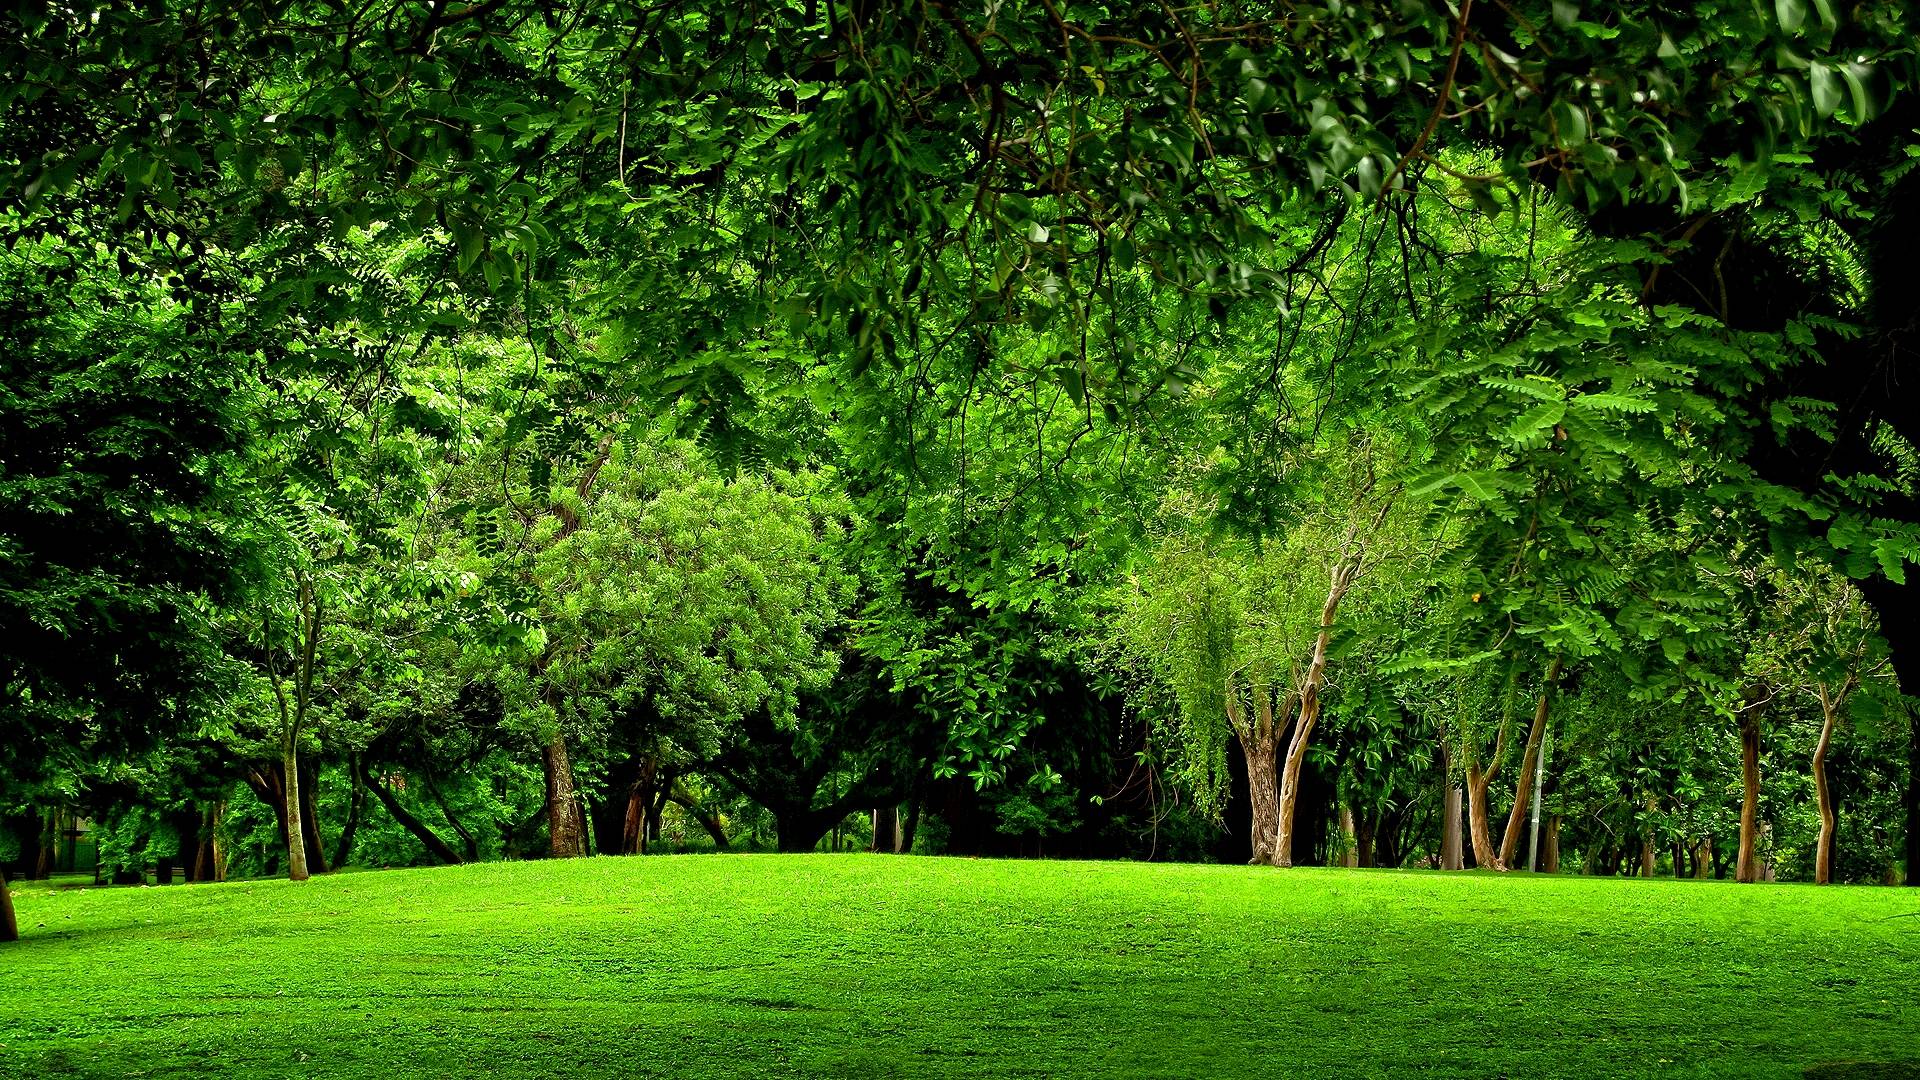 Green forest photo